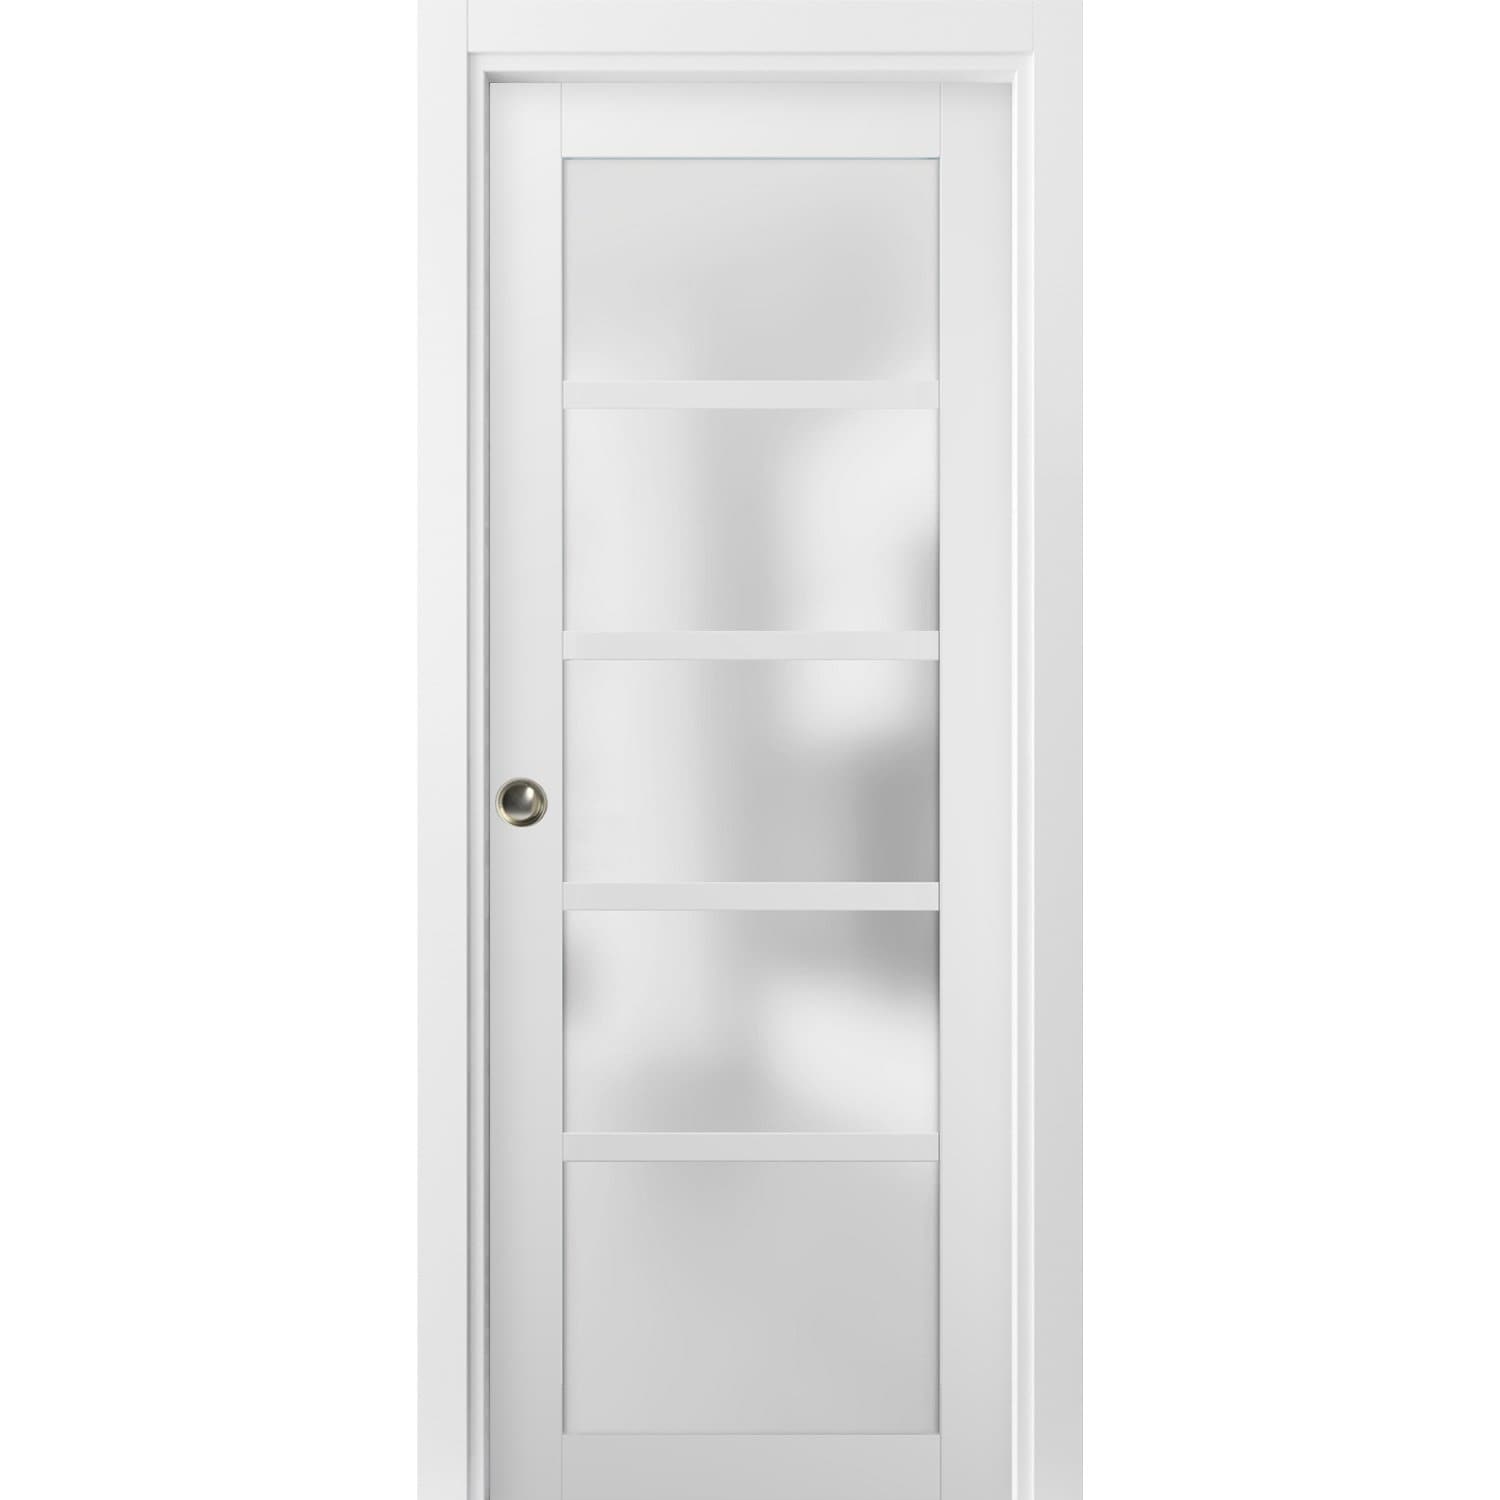 Panel Lite Pocket Door Frames / Quadro 4002 White Silk Frosted Opaque Glass s